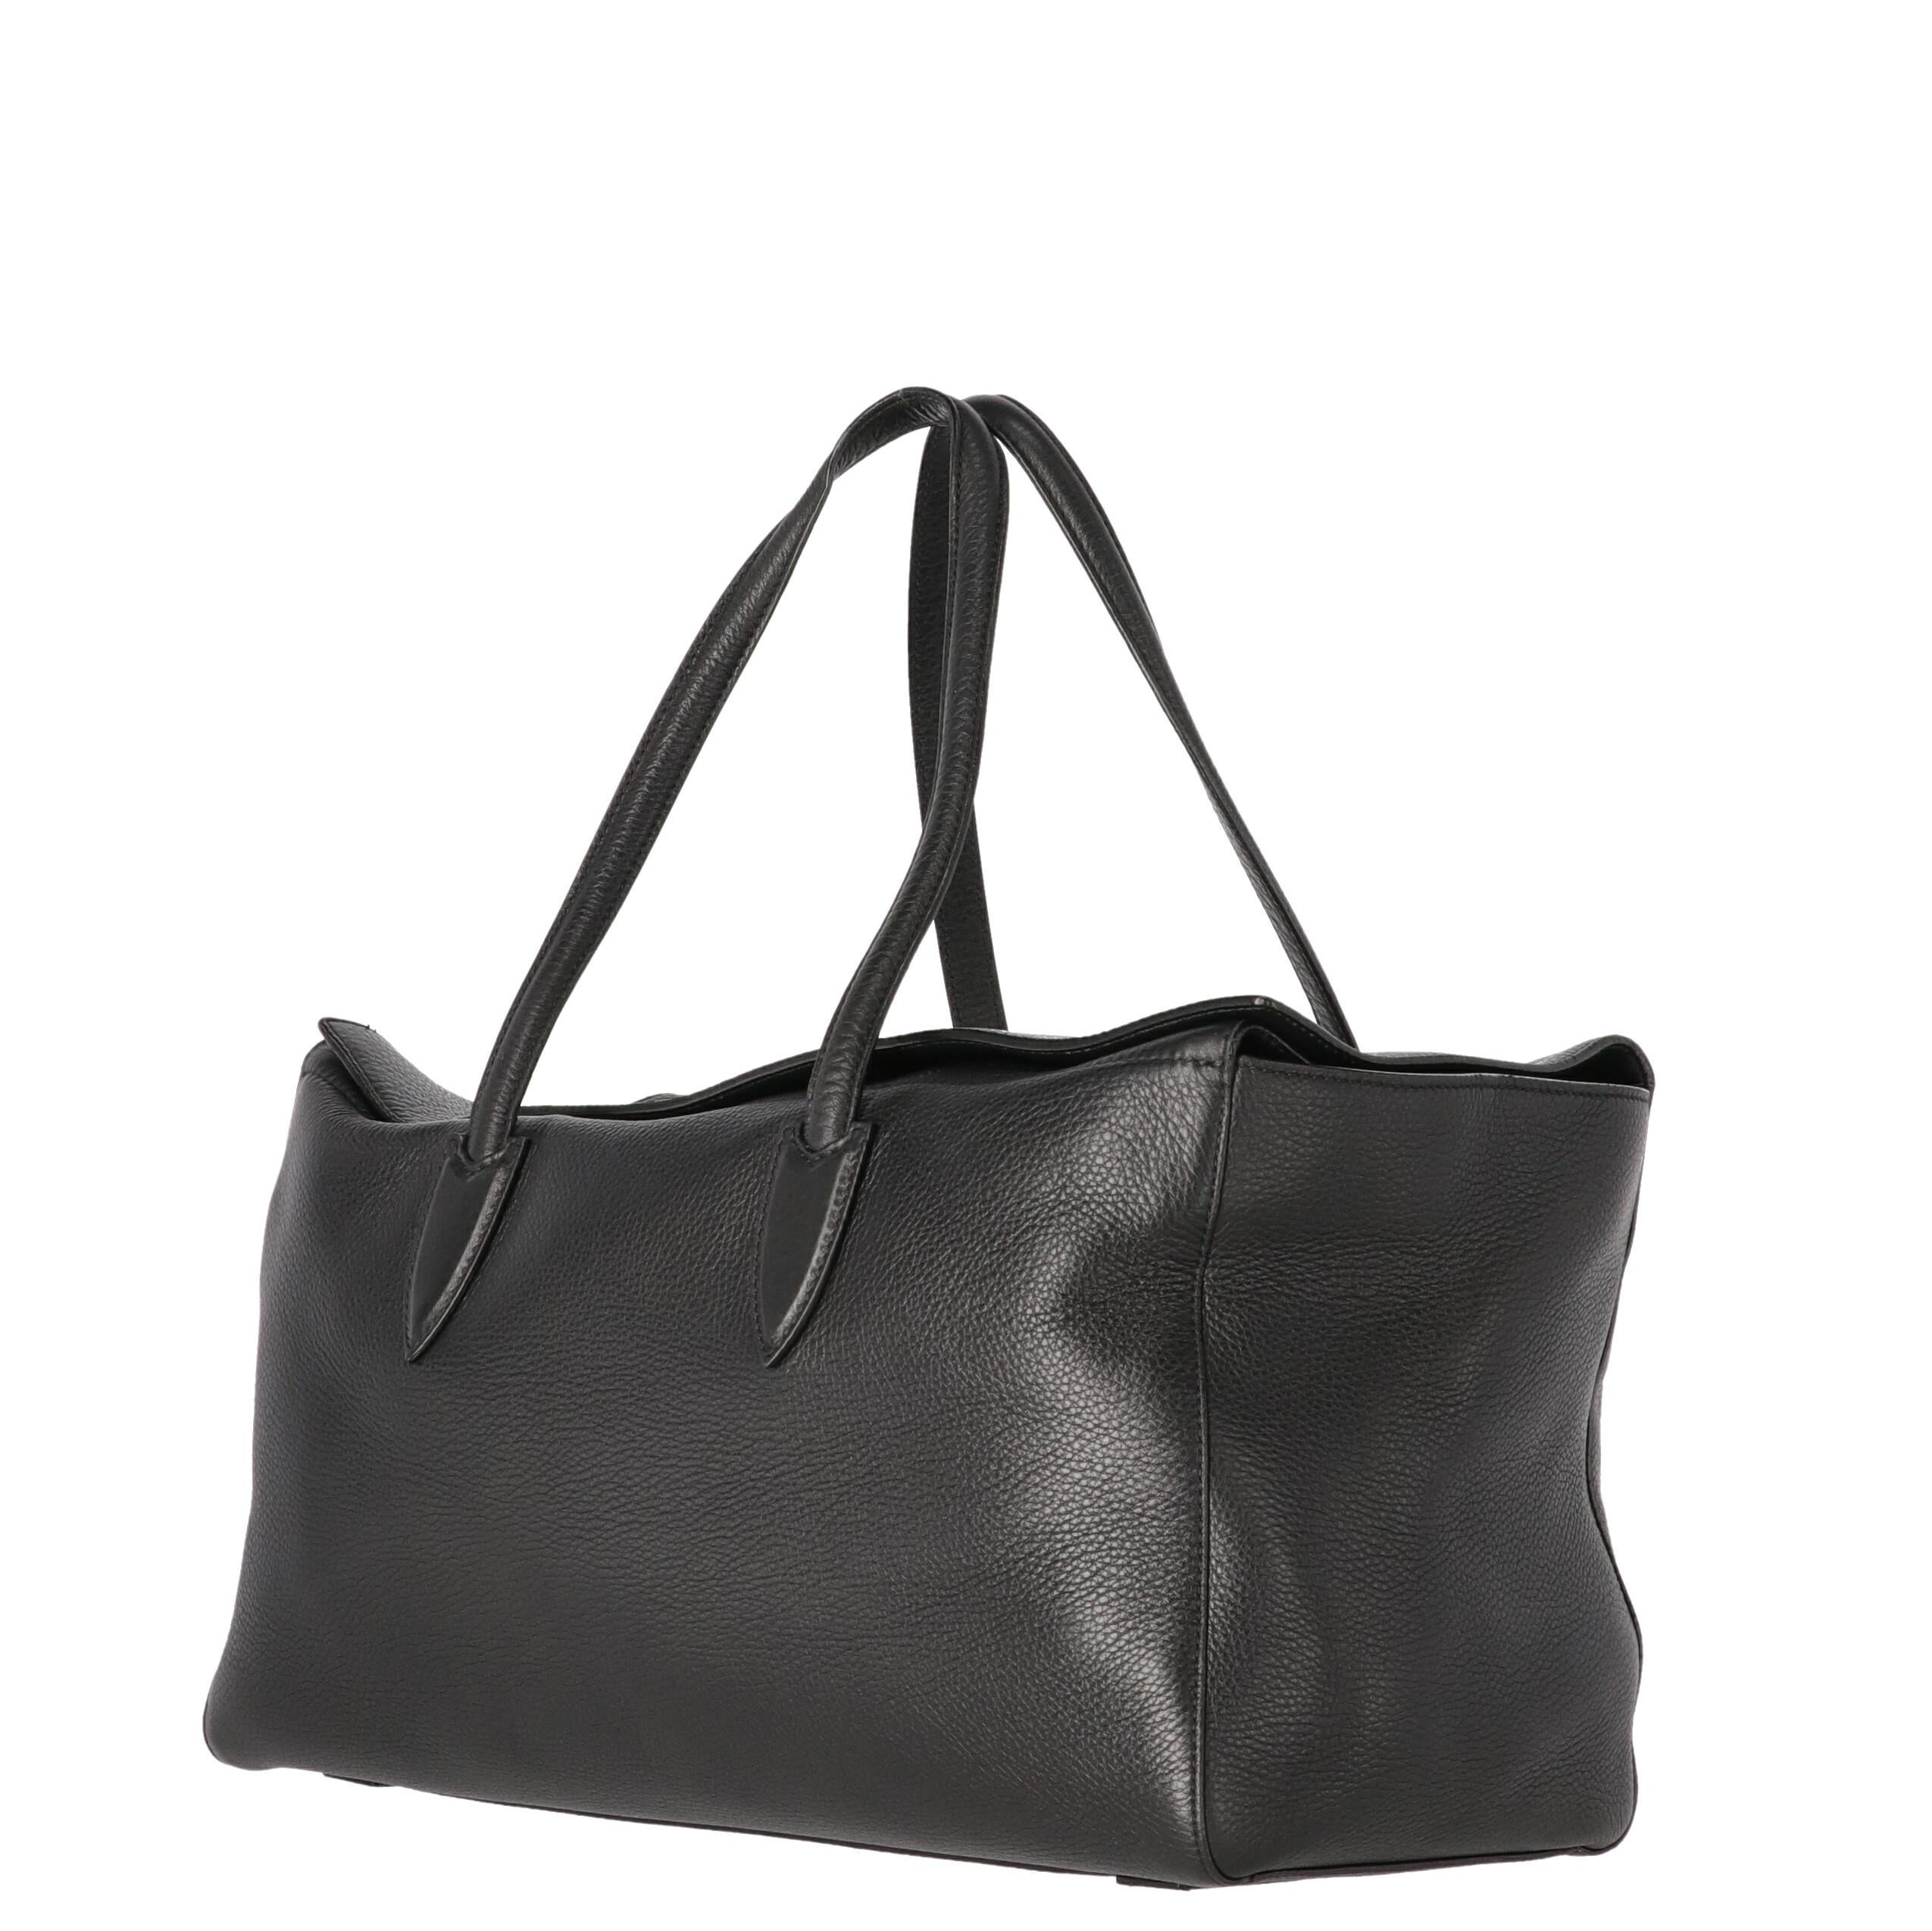 Max Mara black soft genuine leather rectangular tote bag. Two leather handles and double flap with printed gold-tone logo and four invisible magnets closure. Fully lined in cream colored suede. Wide and cushy, to carry everythig you need.

Years: